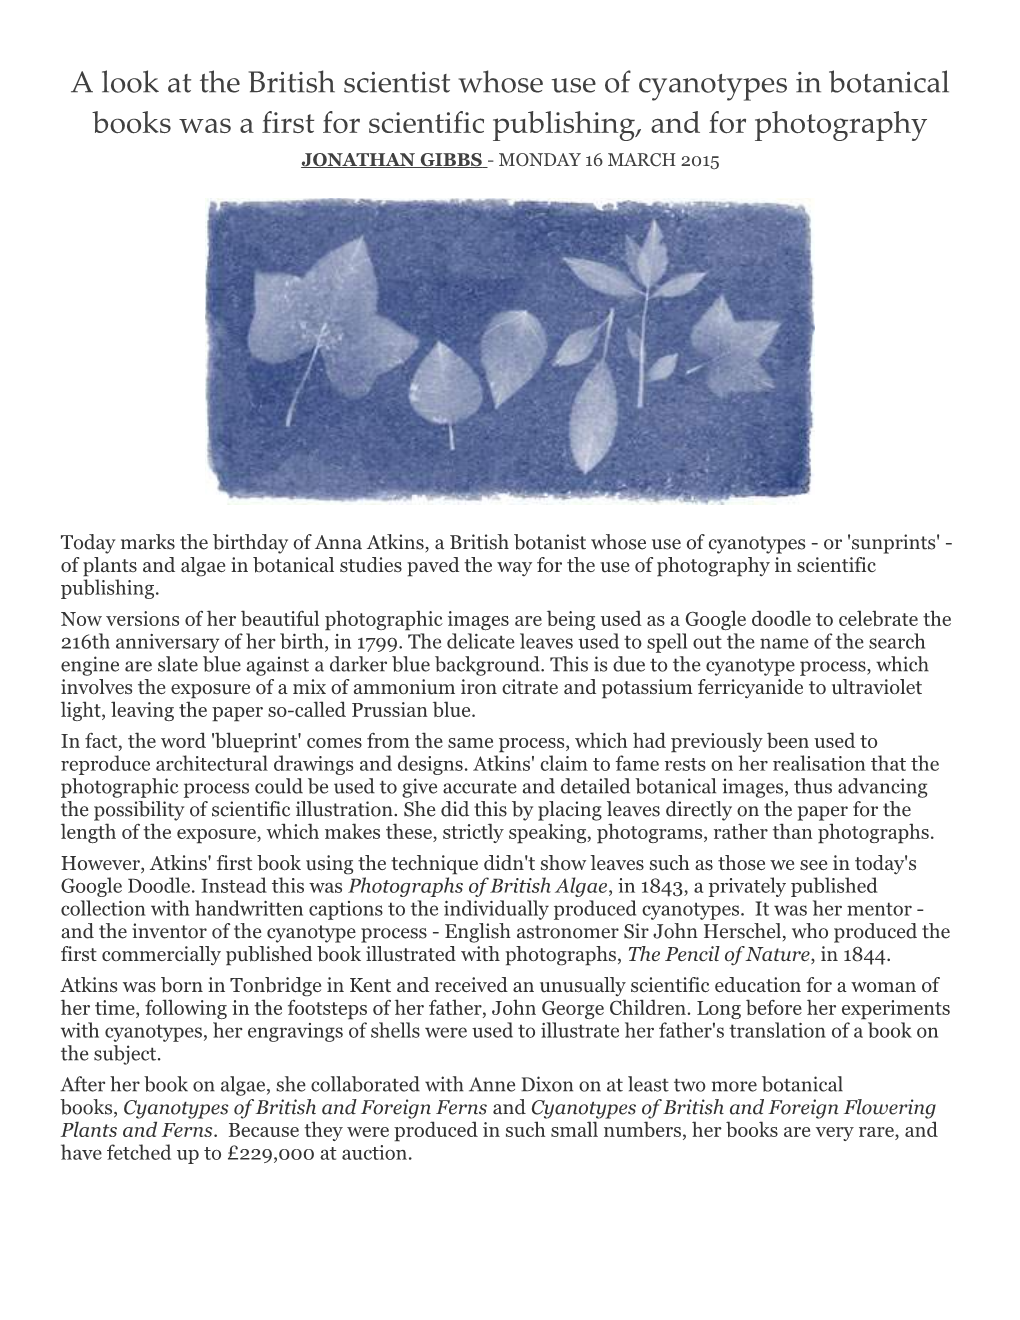 A Look at the British Scientist Whose Use of Cyanotypes in Botanical Books Was a First